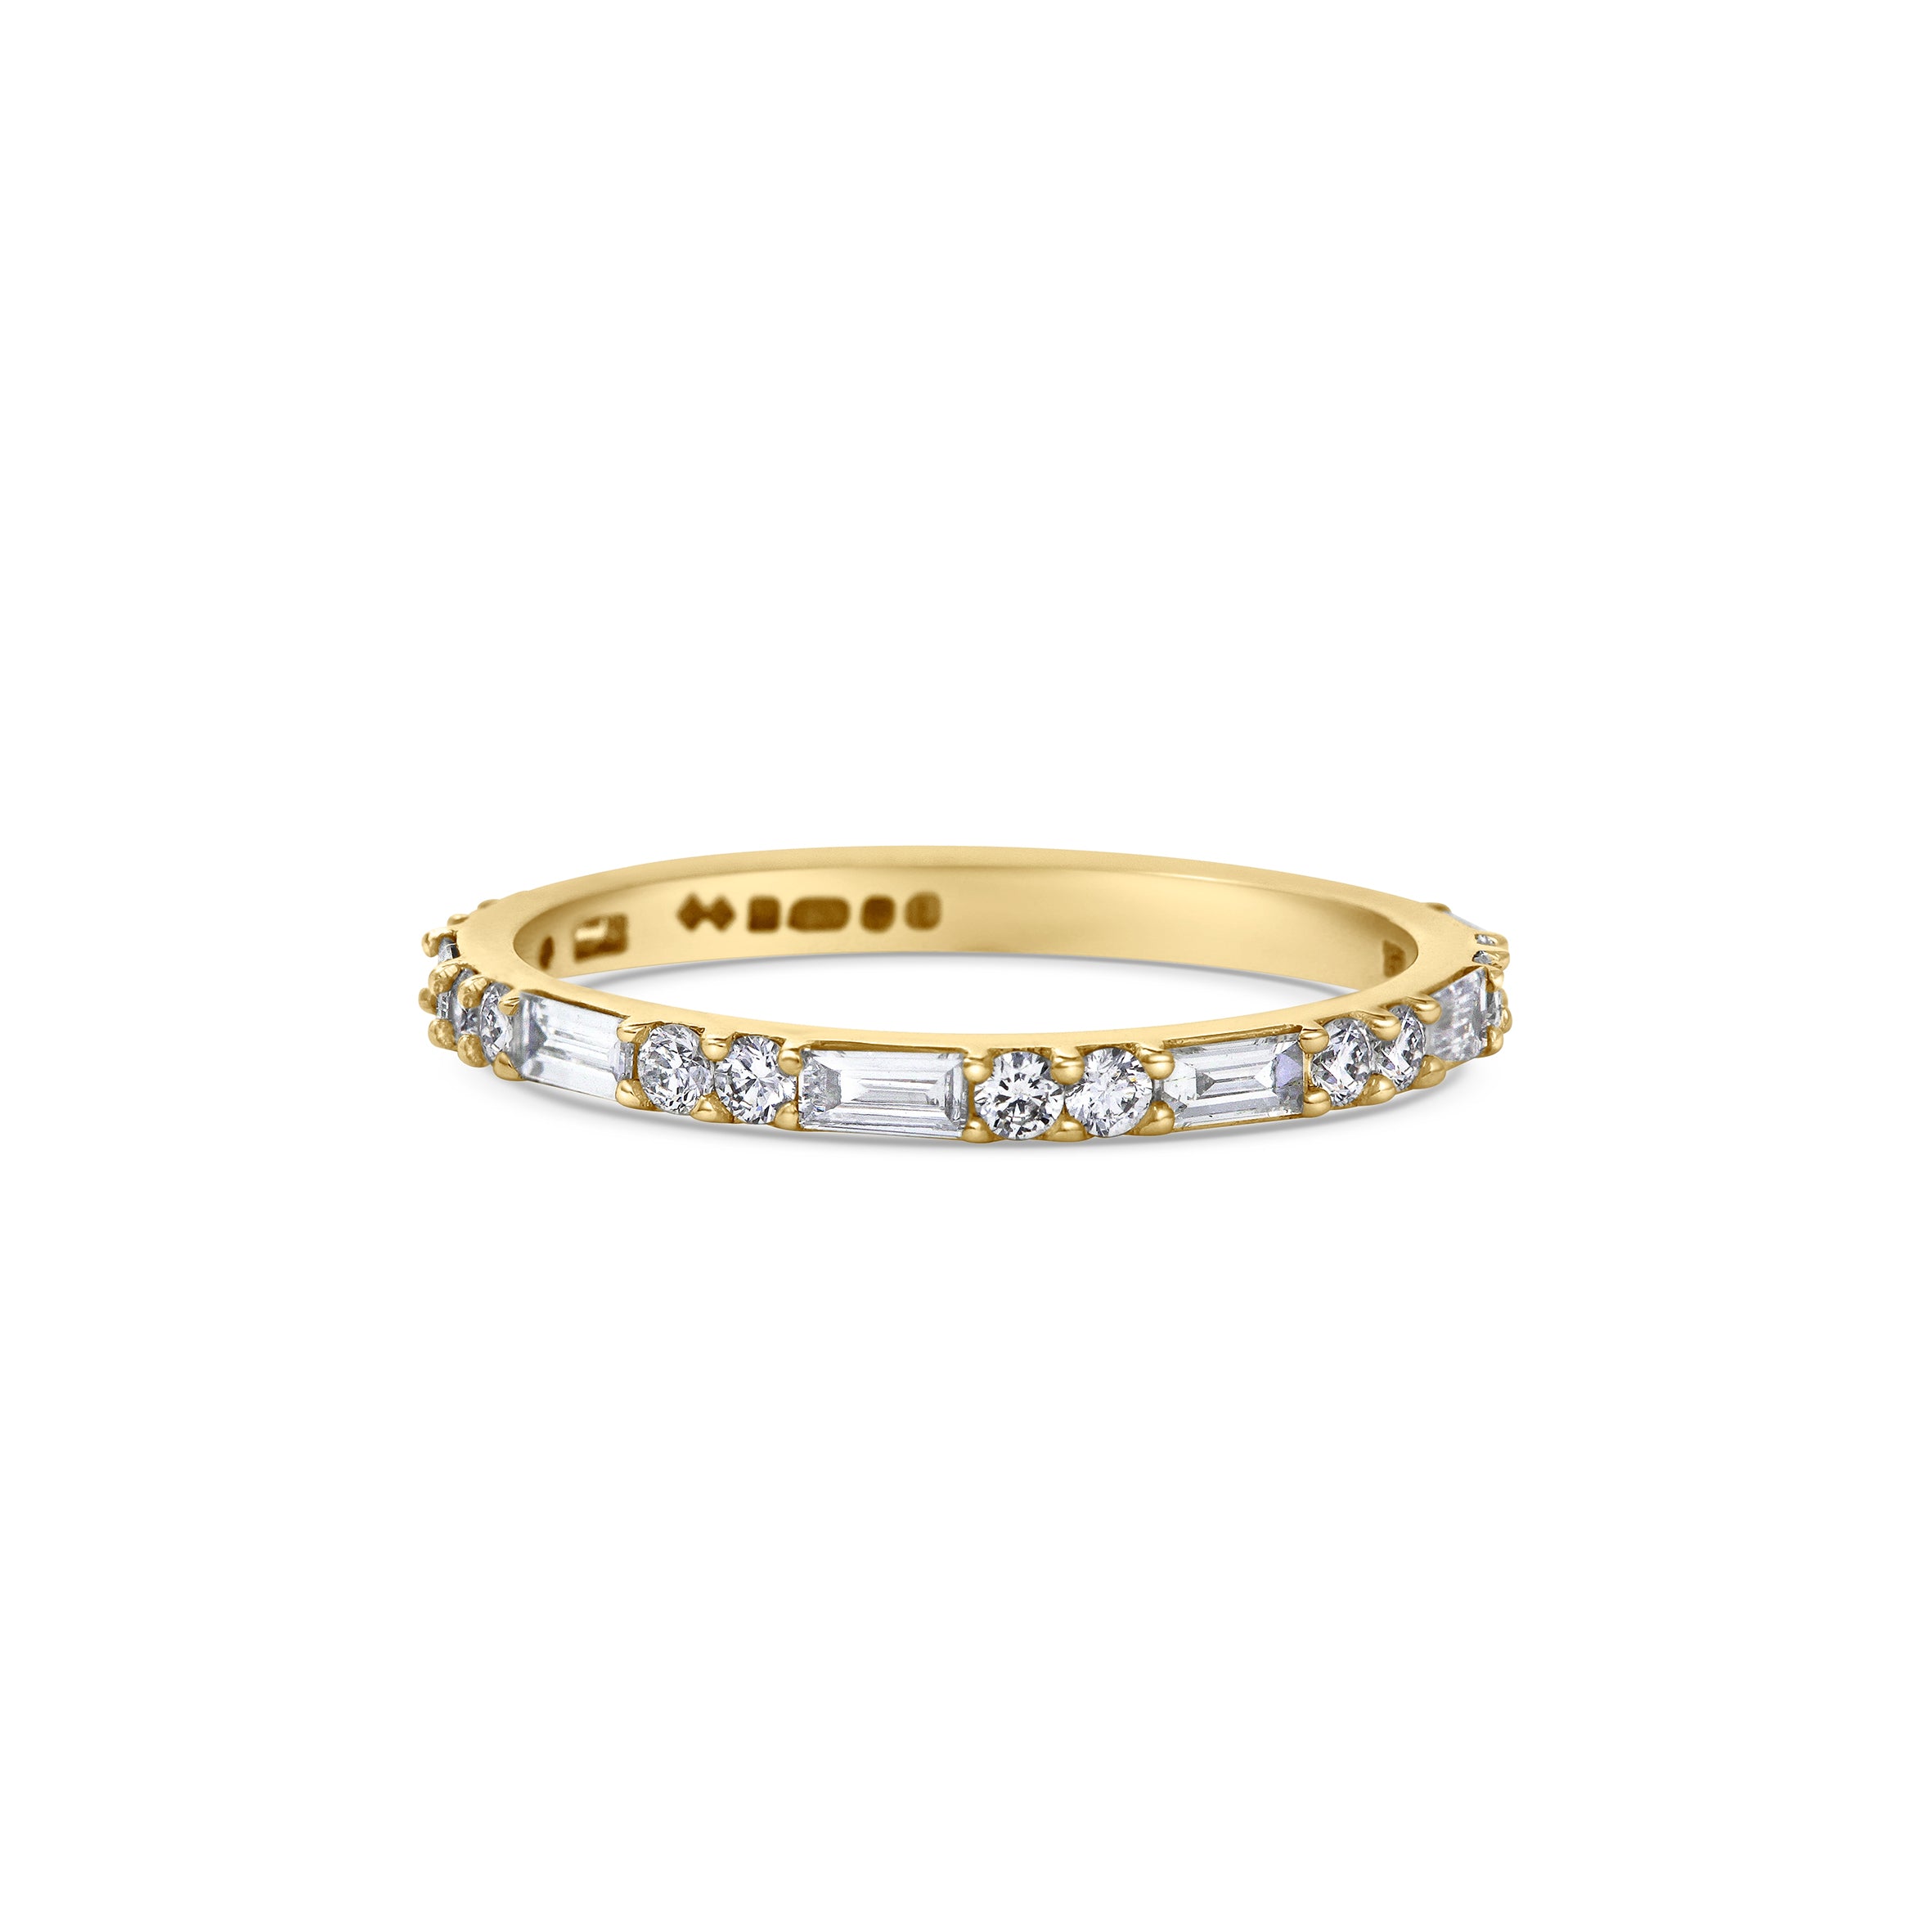 The Baguette & Round Diamond Wedding Band by East London jeweller Rachel Boston | Discover our collections of unique and timeless engagement rings, wedding rings, and modern fine jewellery.